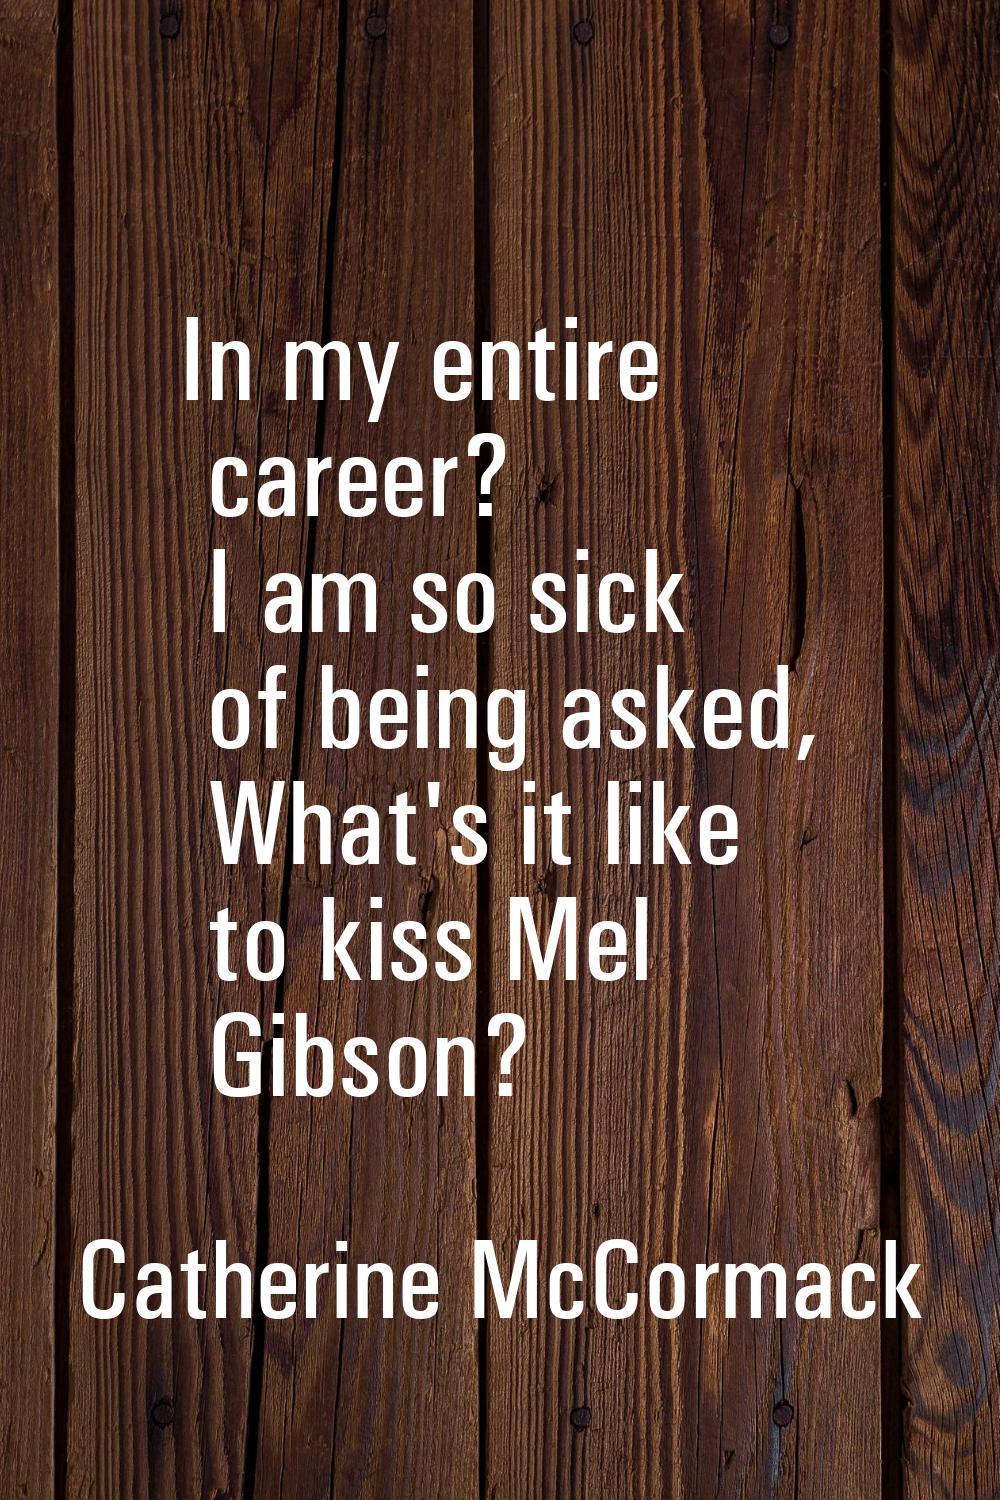 In my entire career? I am so sick of being asked, What's it like to kiss Mel Gibson?